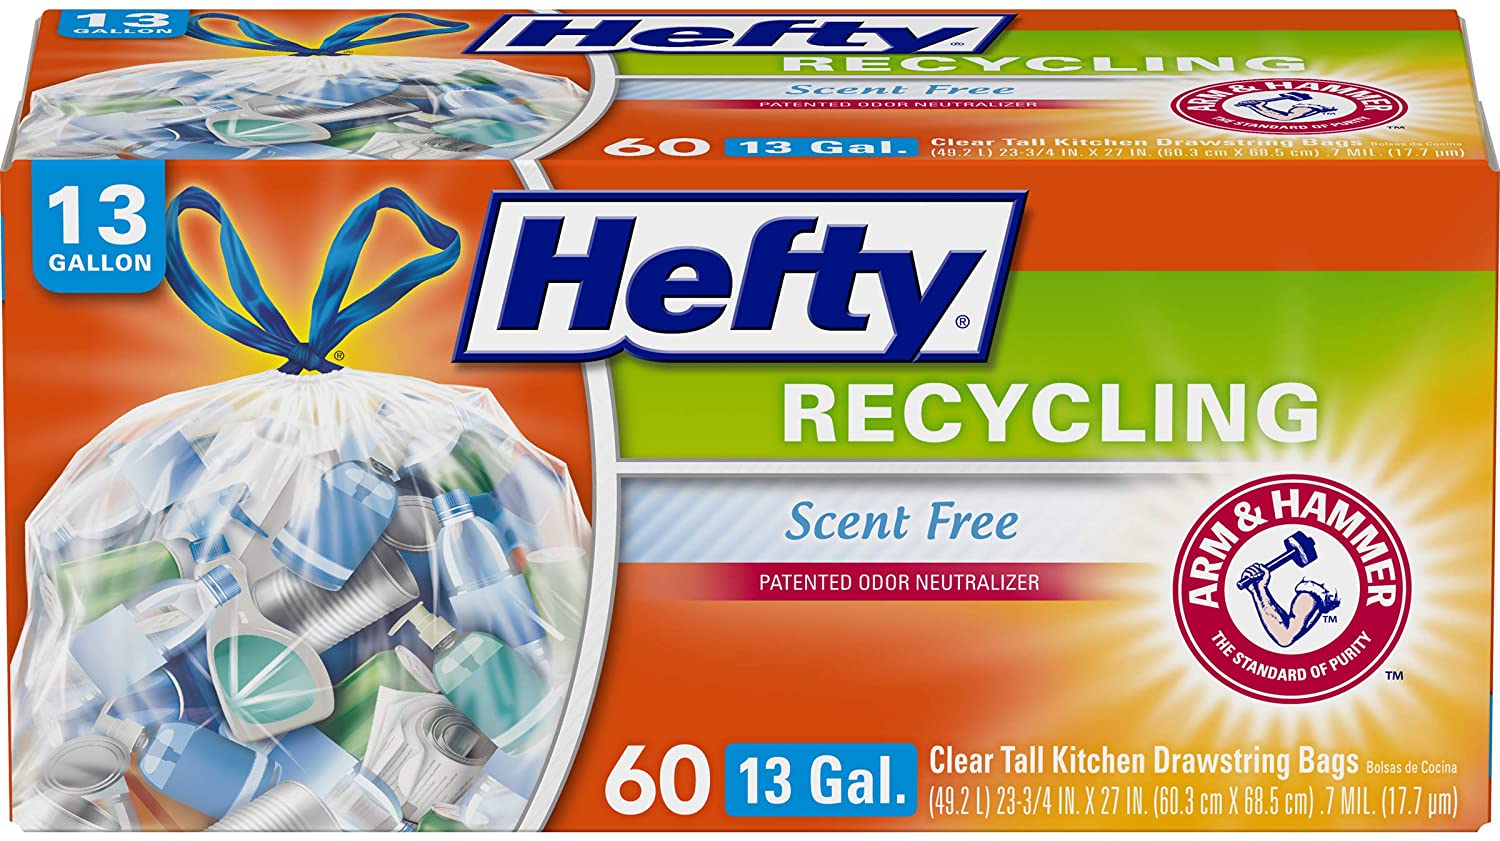 https://truthinadvertising.org/wp-content/uploads/2021/05/hefty-recycling-bags-image.jpg